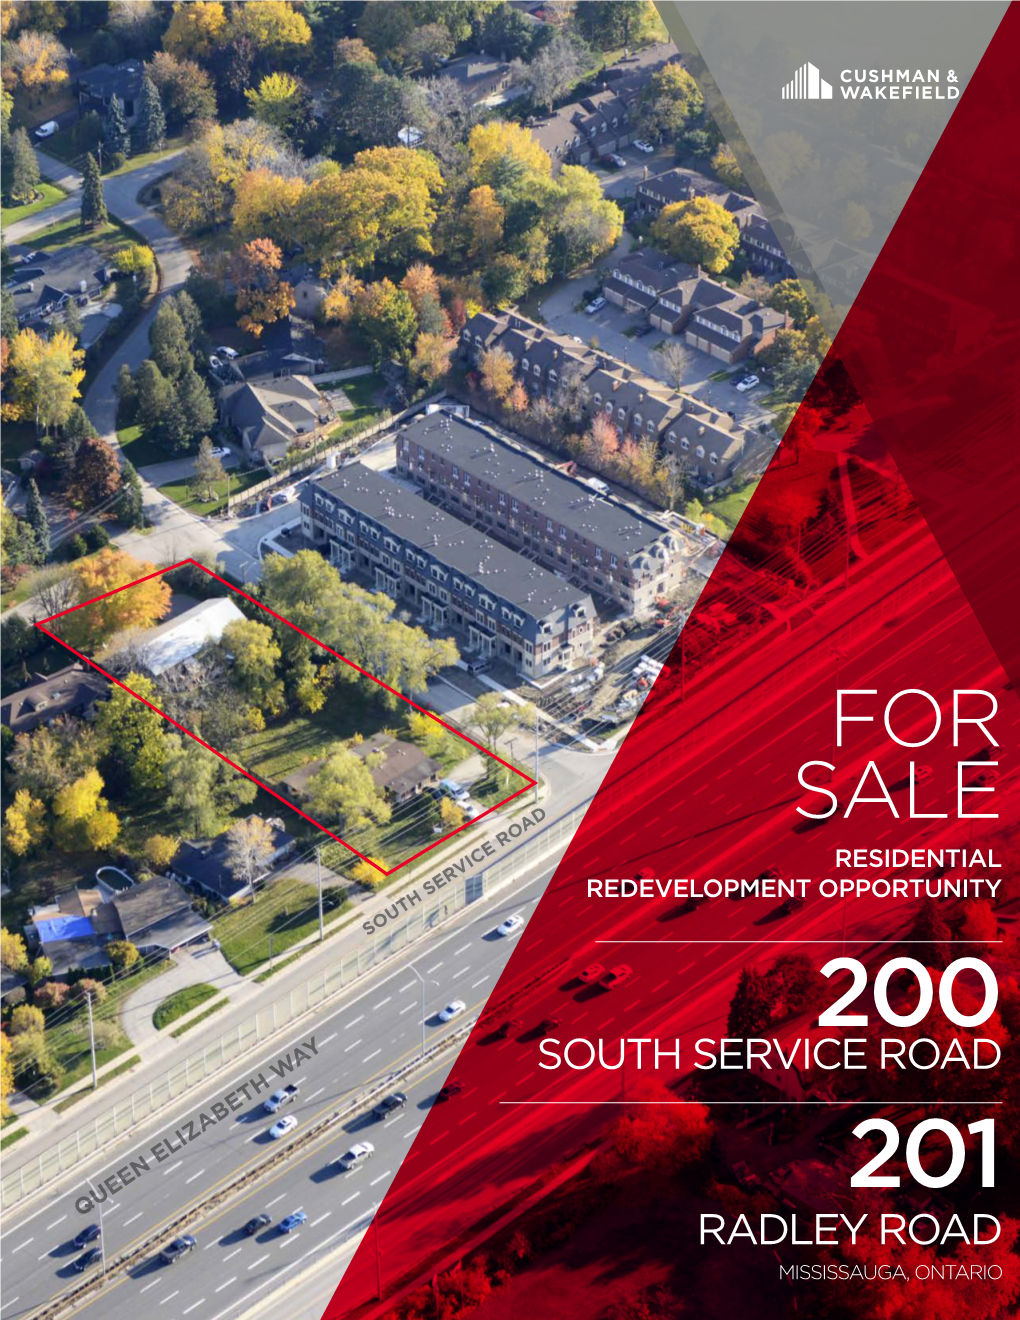 For Sale Residential Redevelopment Opportunity